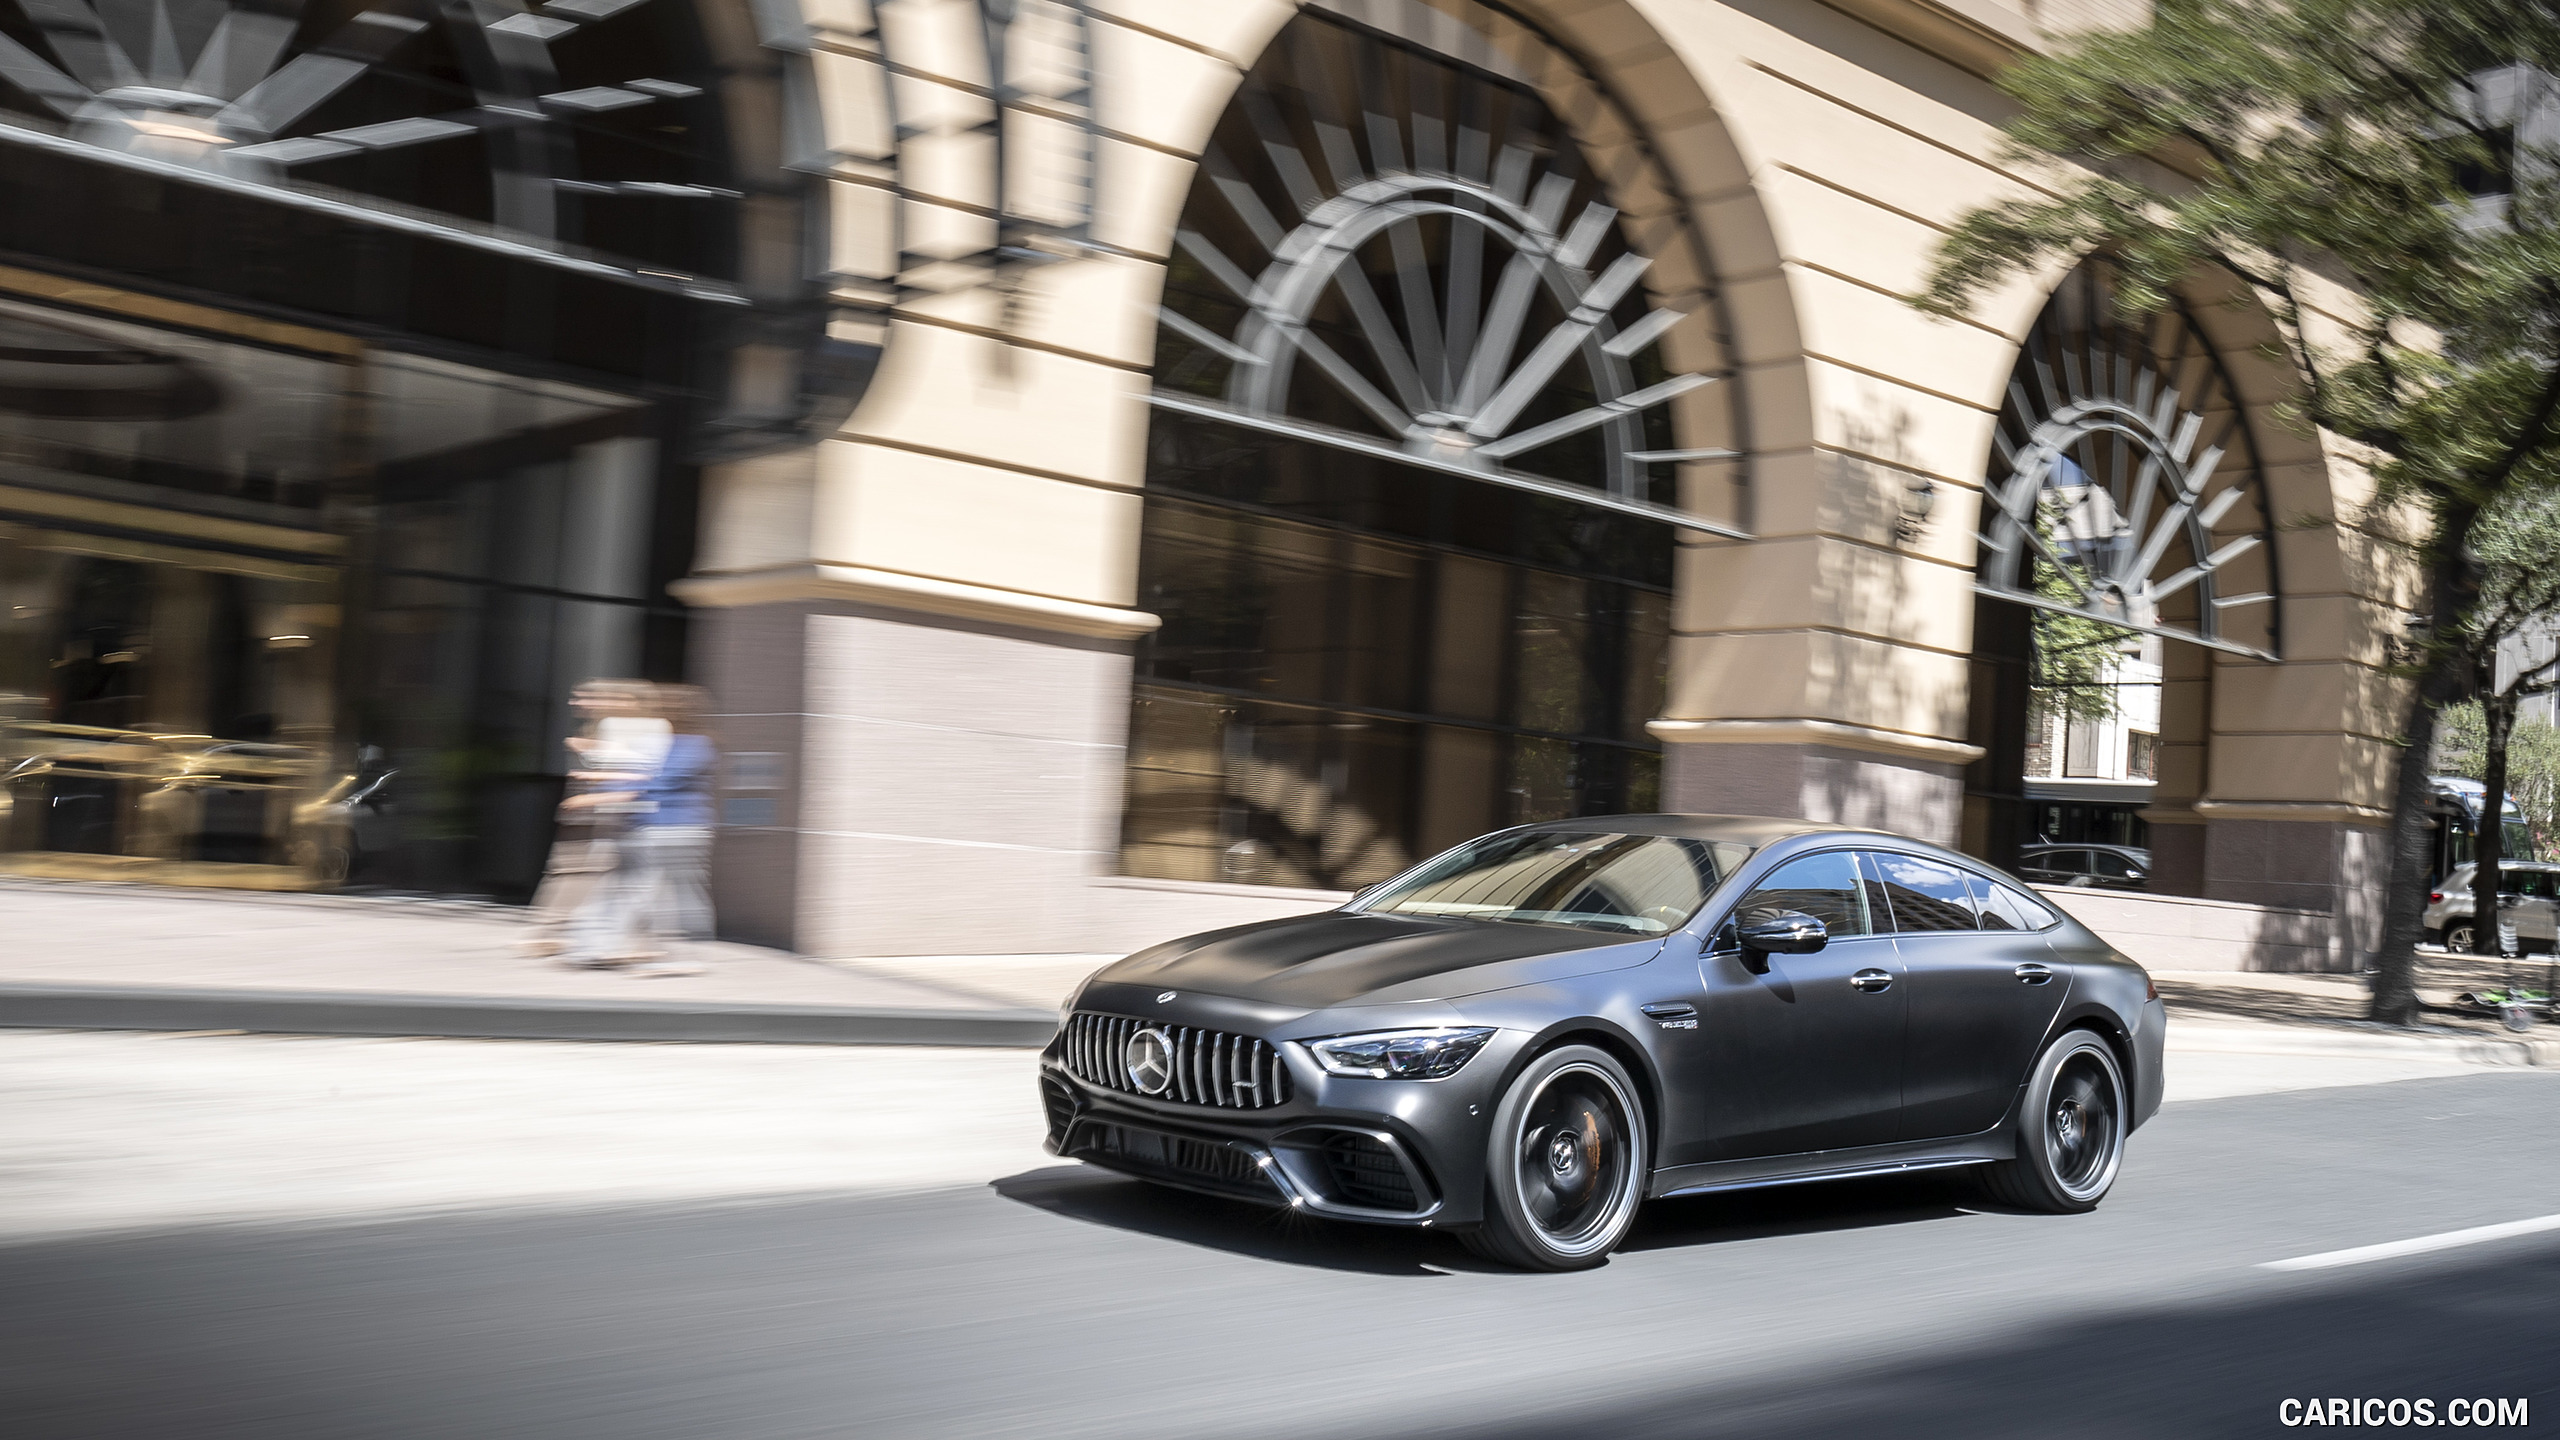 2019 Mercedes-AMG GT 63 S 4MATIC+ 4-Door Coupe - Front Three-Quarter, #202 of 427